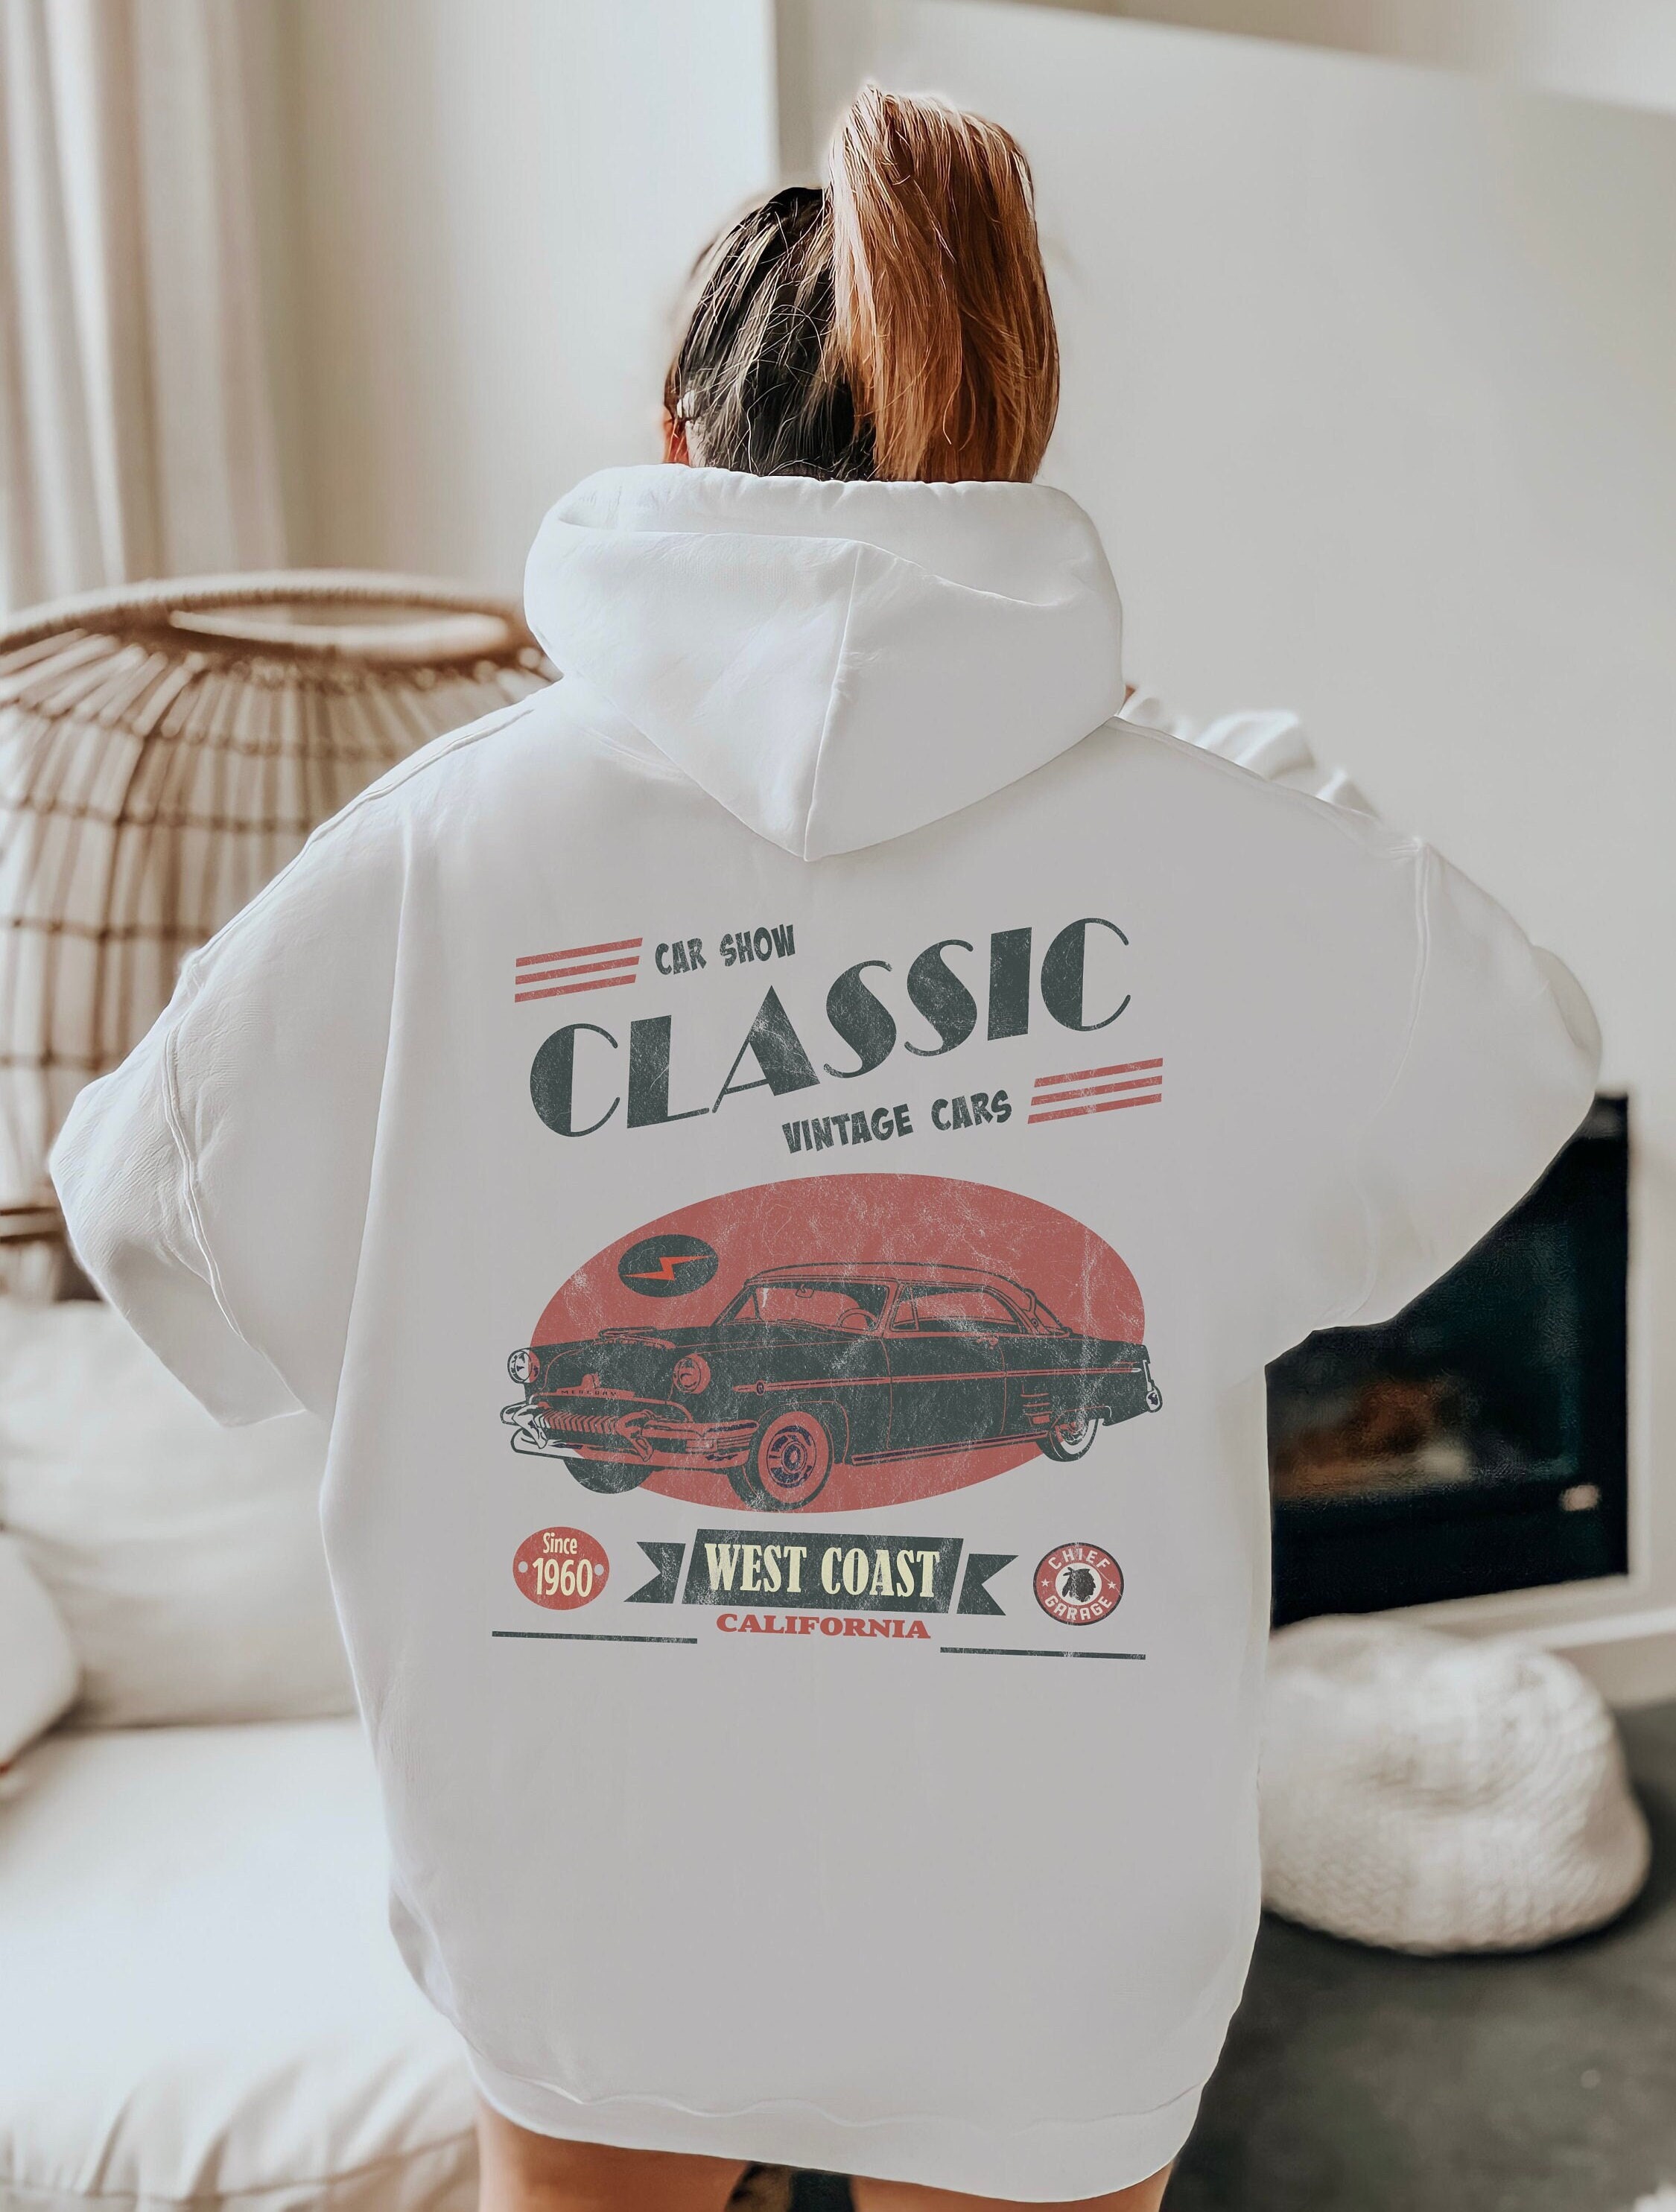  Classic Retro California The Golden State 1850 Hoodie : Clothing,  Shoes & Jewelry